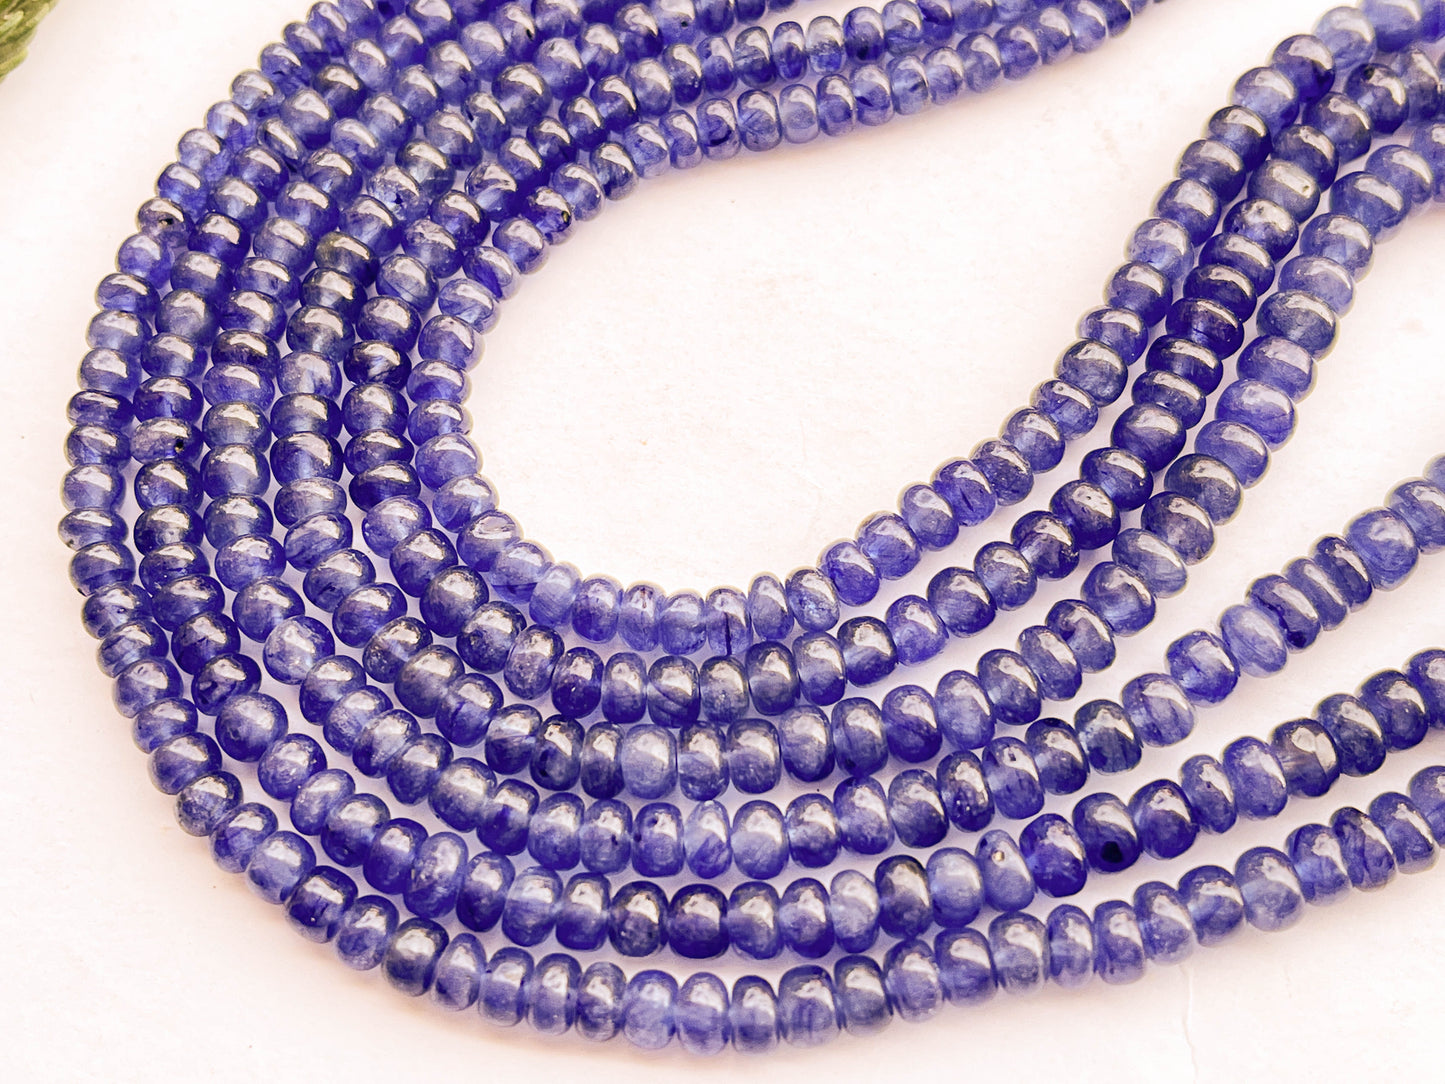 Blue Sapphire Glass Filled Smooth Rondelle Shape Beads Beadsforyourjewelry